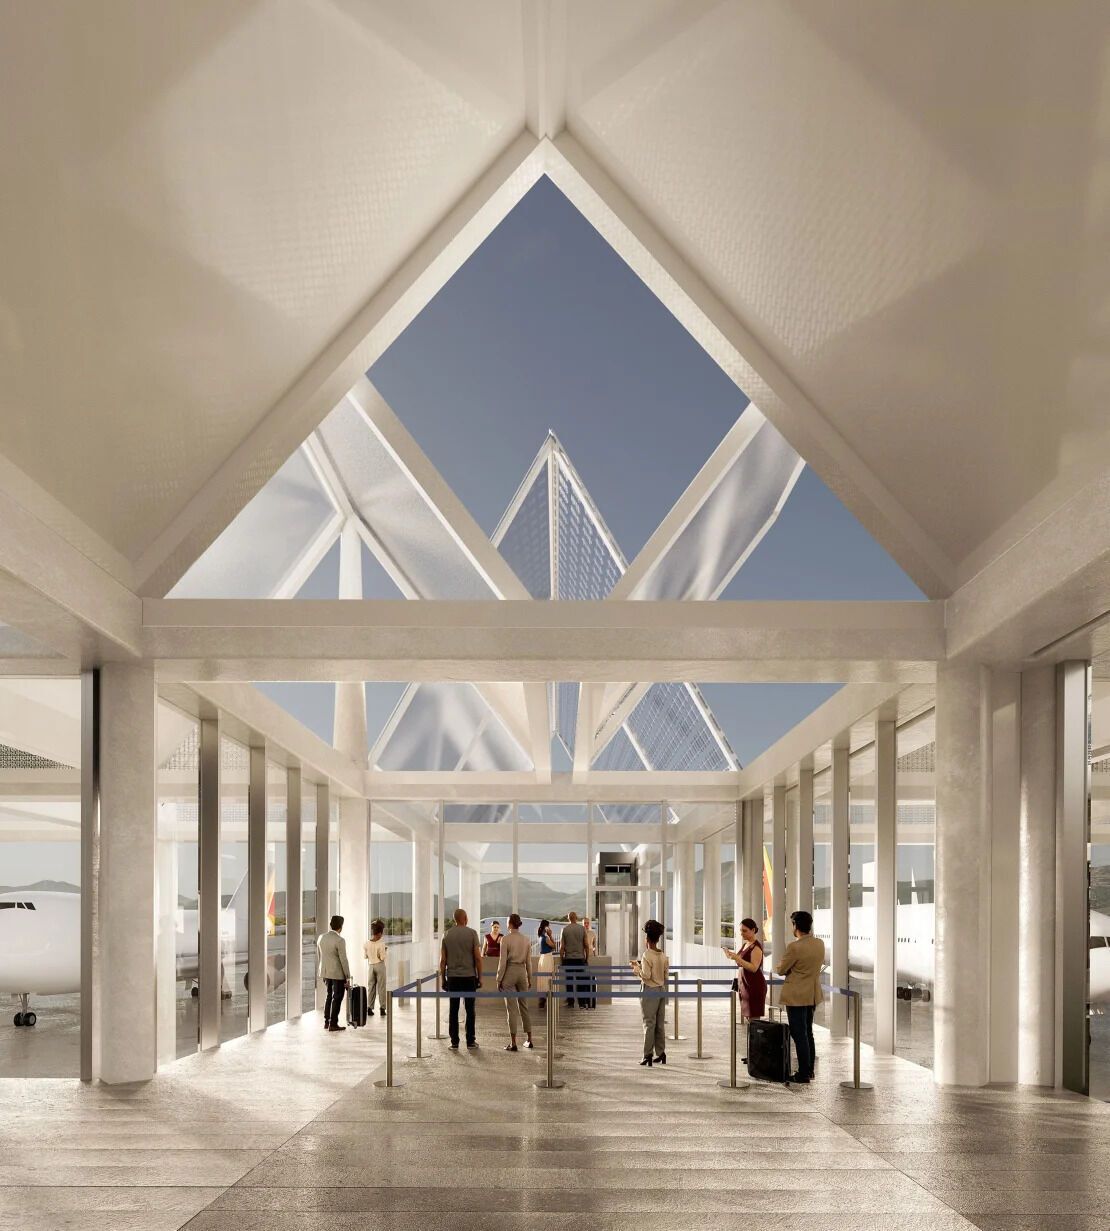 On the Amalfi Coast in Italy, the airport is being renovated